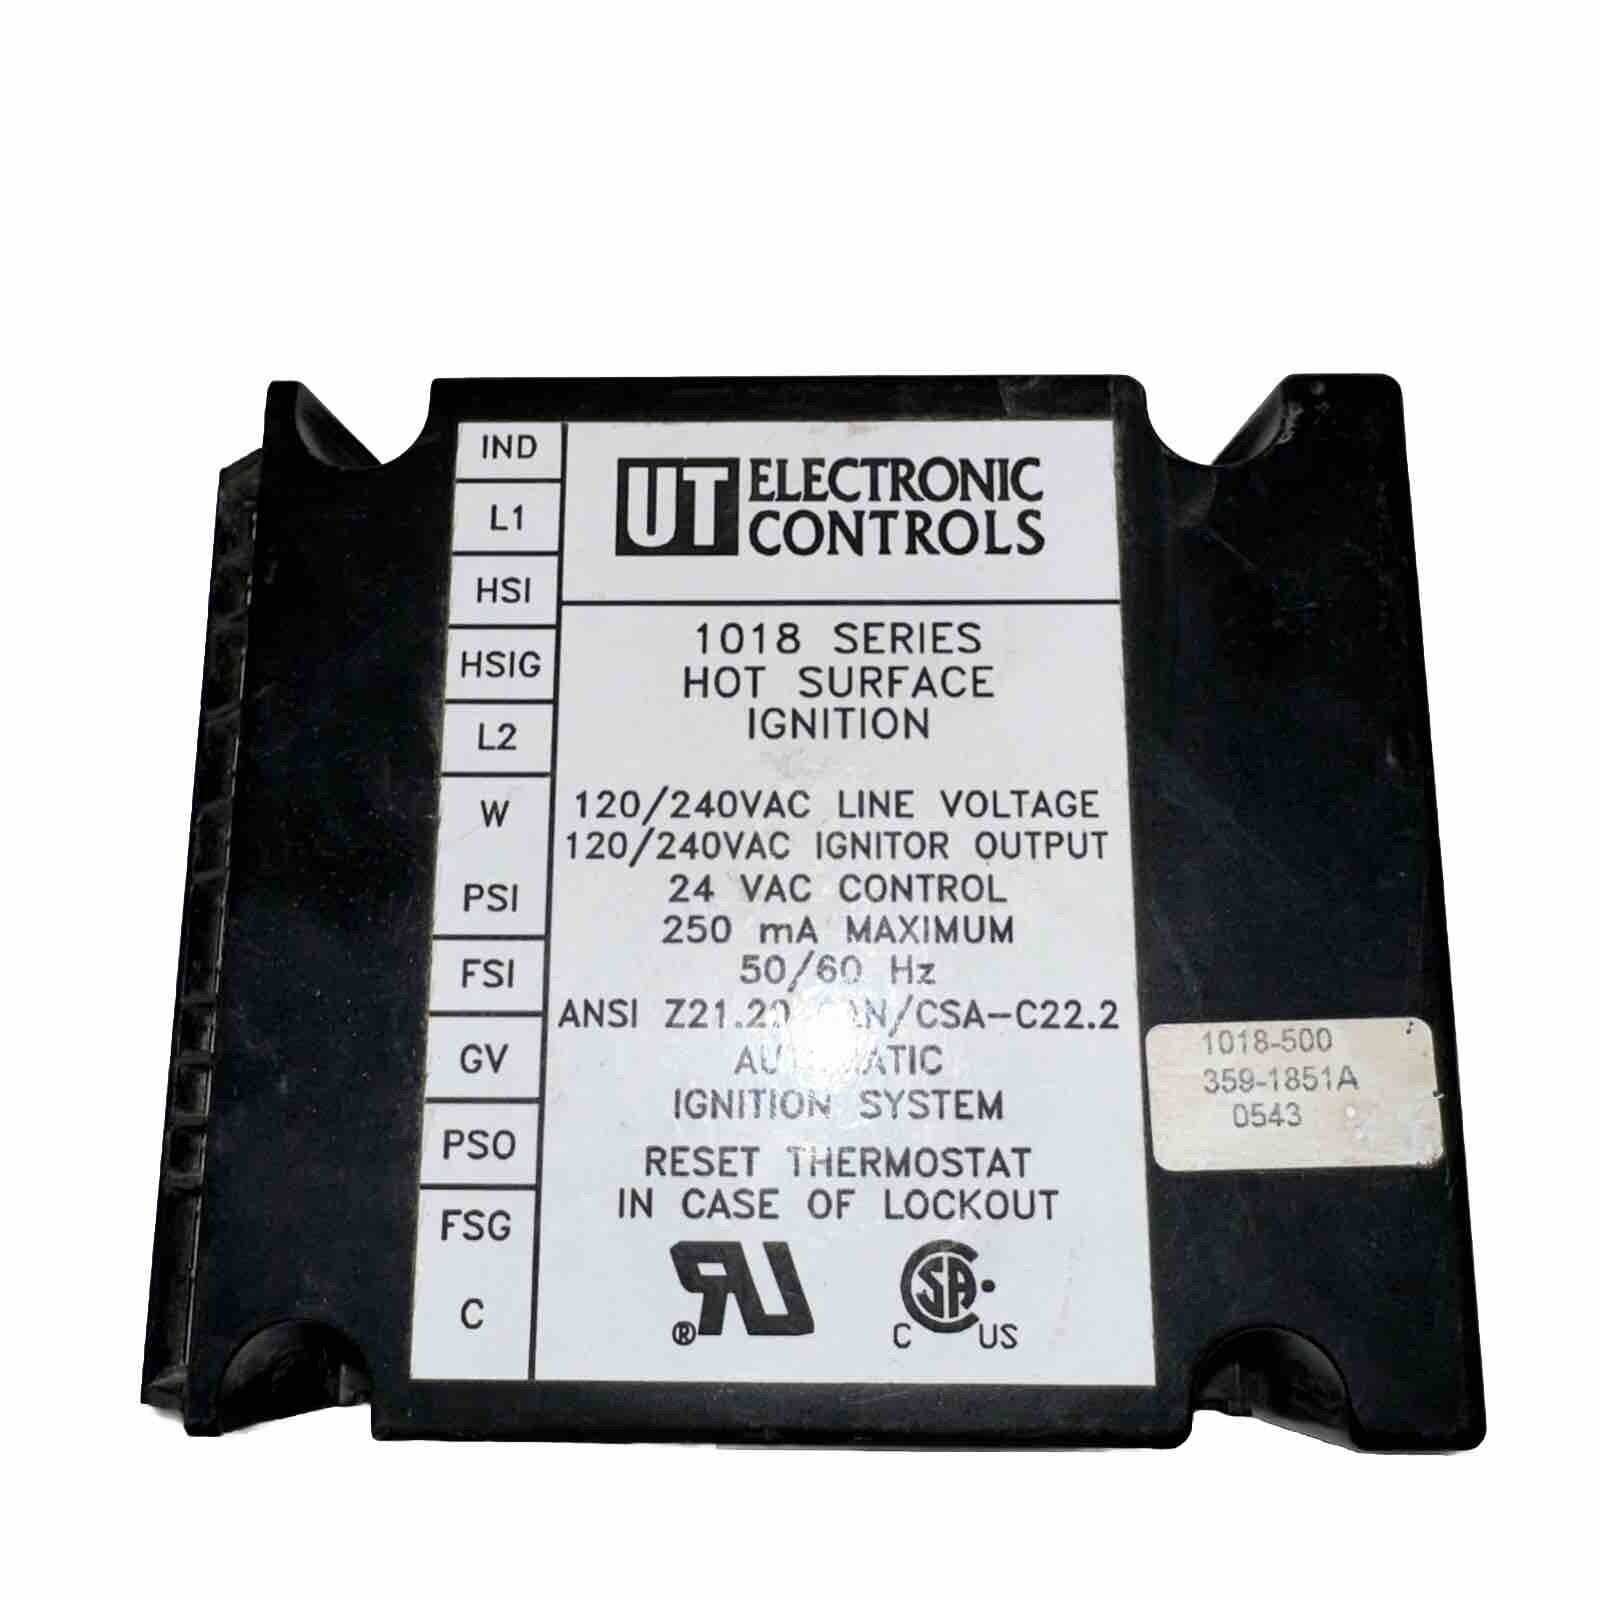 UT Electronics 1018 Series Furnace Hot Surface Ignition 1018-500 0543 Automatic